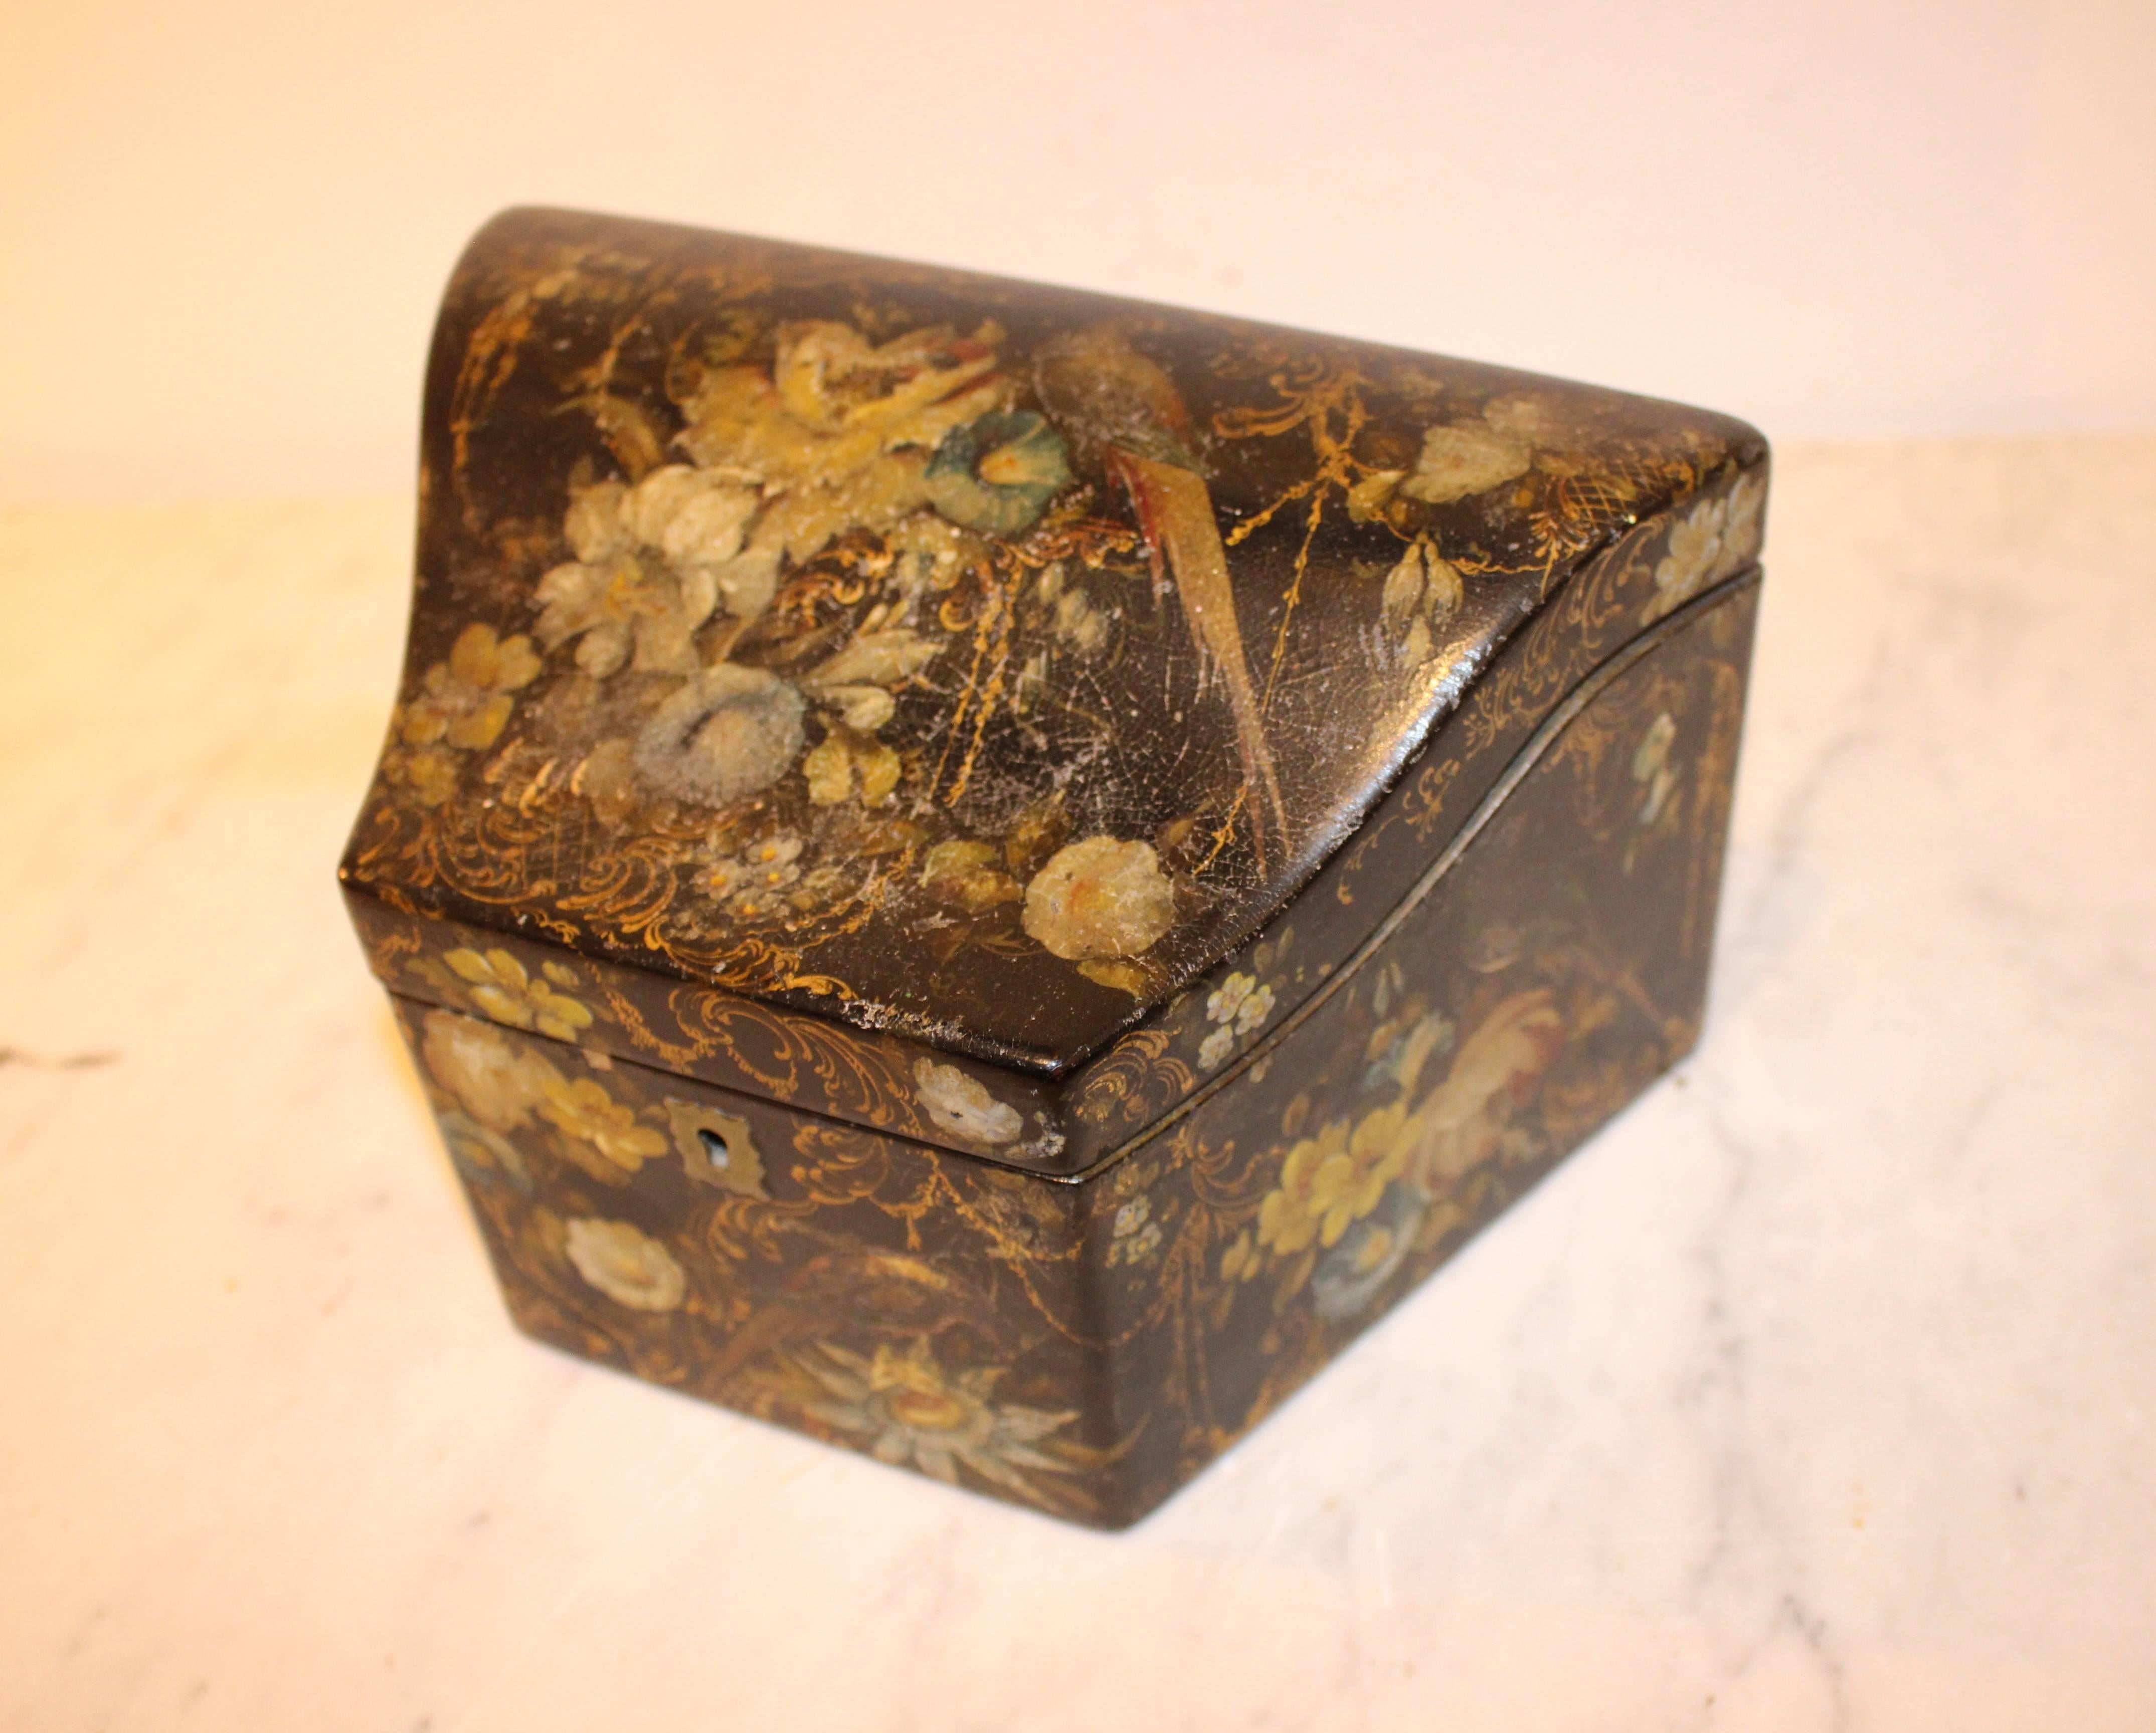 A most beautiful Victorian Papier-Mache Stationary Box with painted and gilded birds and flowers. Rising serpentine lid lifts to reveal slotted stationary compartments. Beautifully painted decoration applied to sides and lid. 